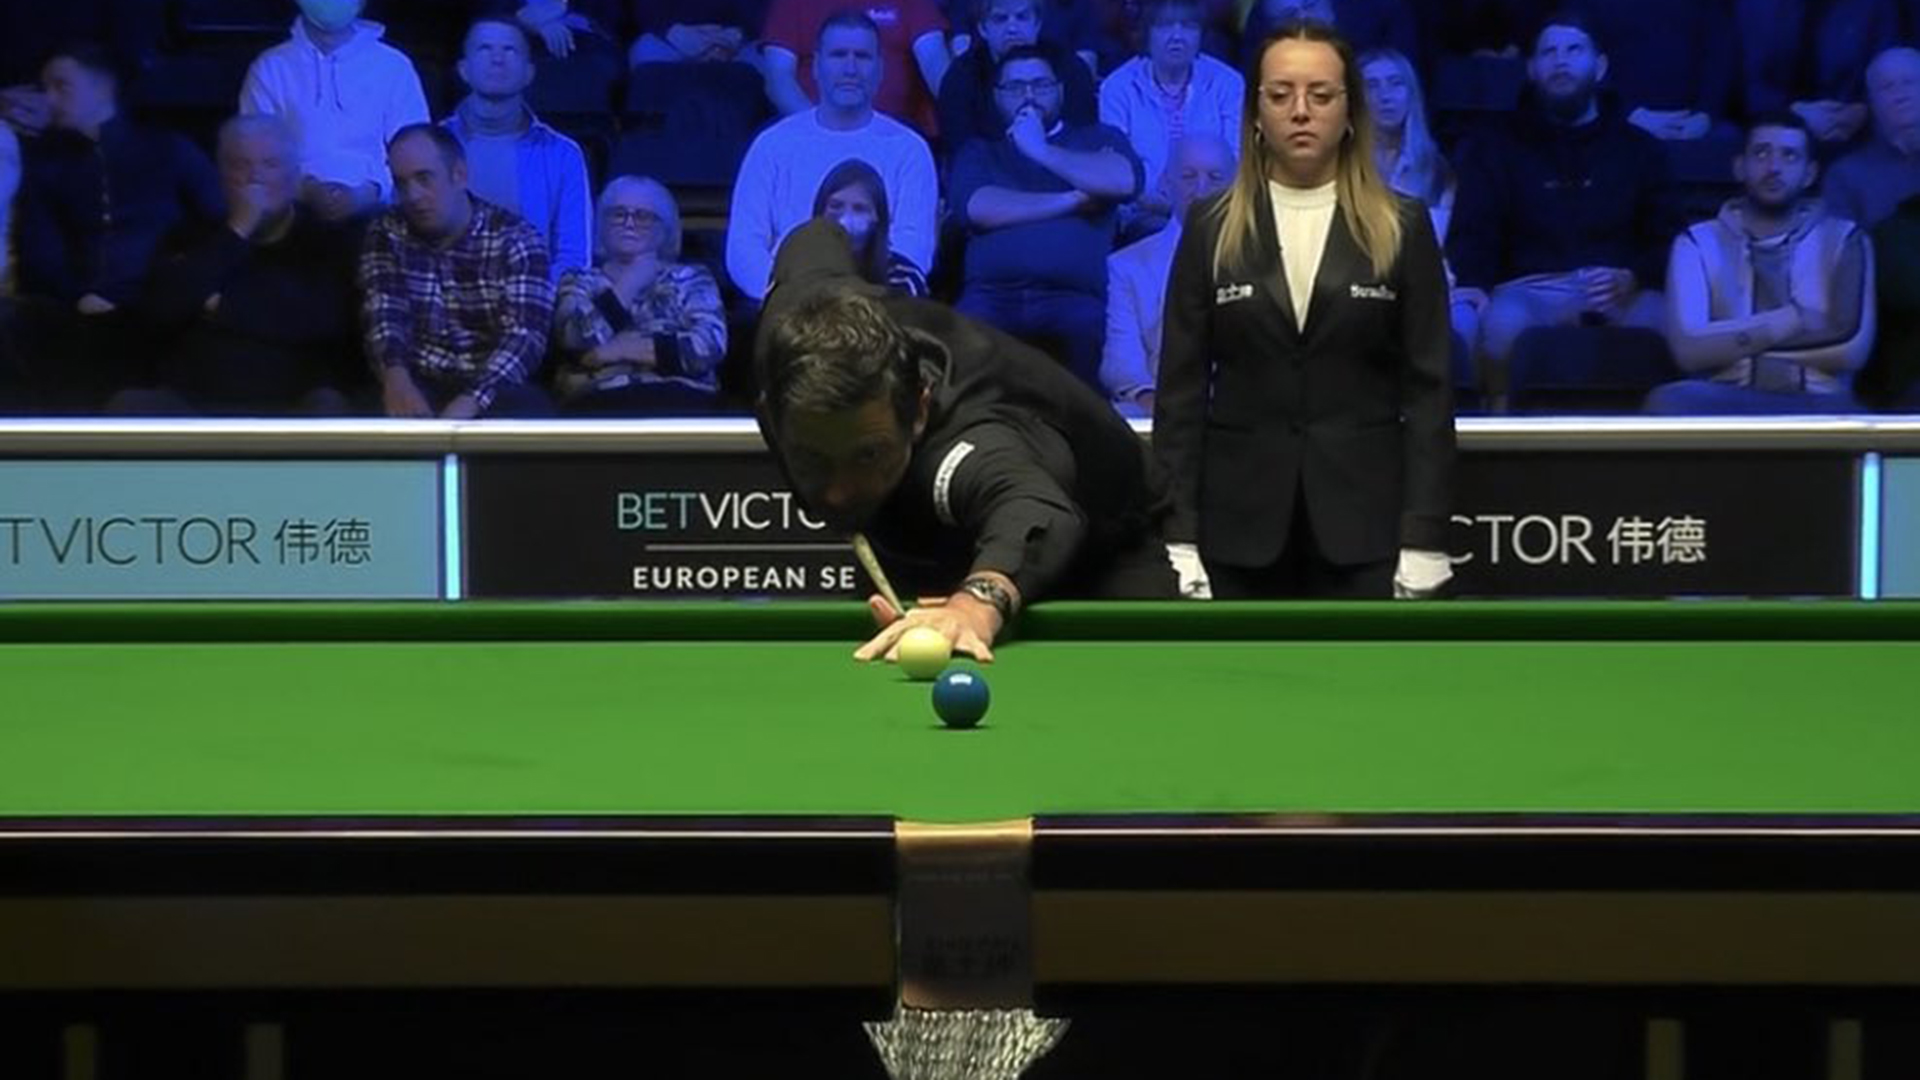 Snooker results Ronnie OSullivan makes two centuries in 5-1 European Masters win over Tom Ford